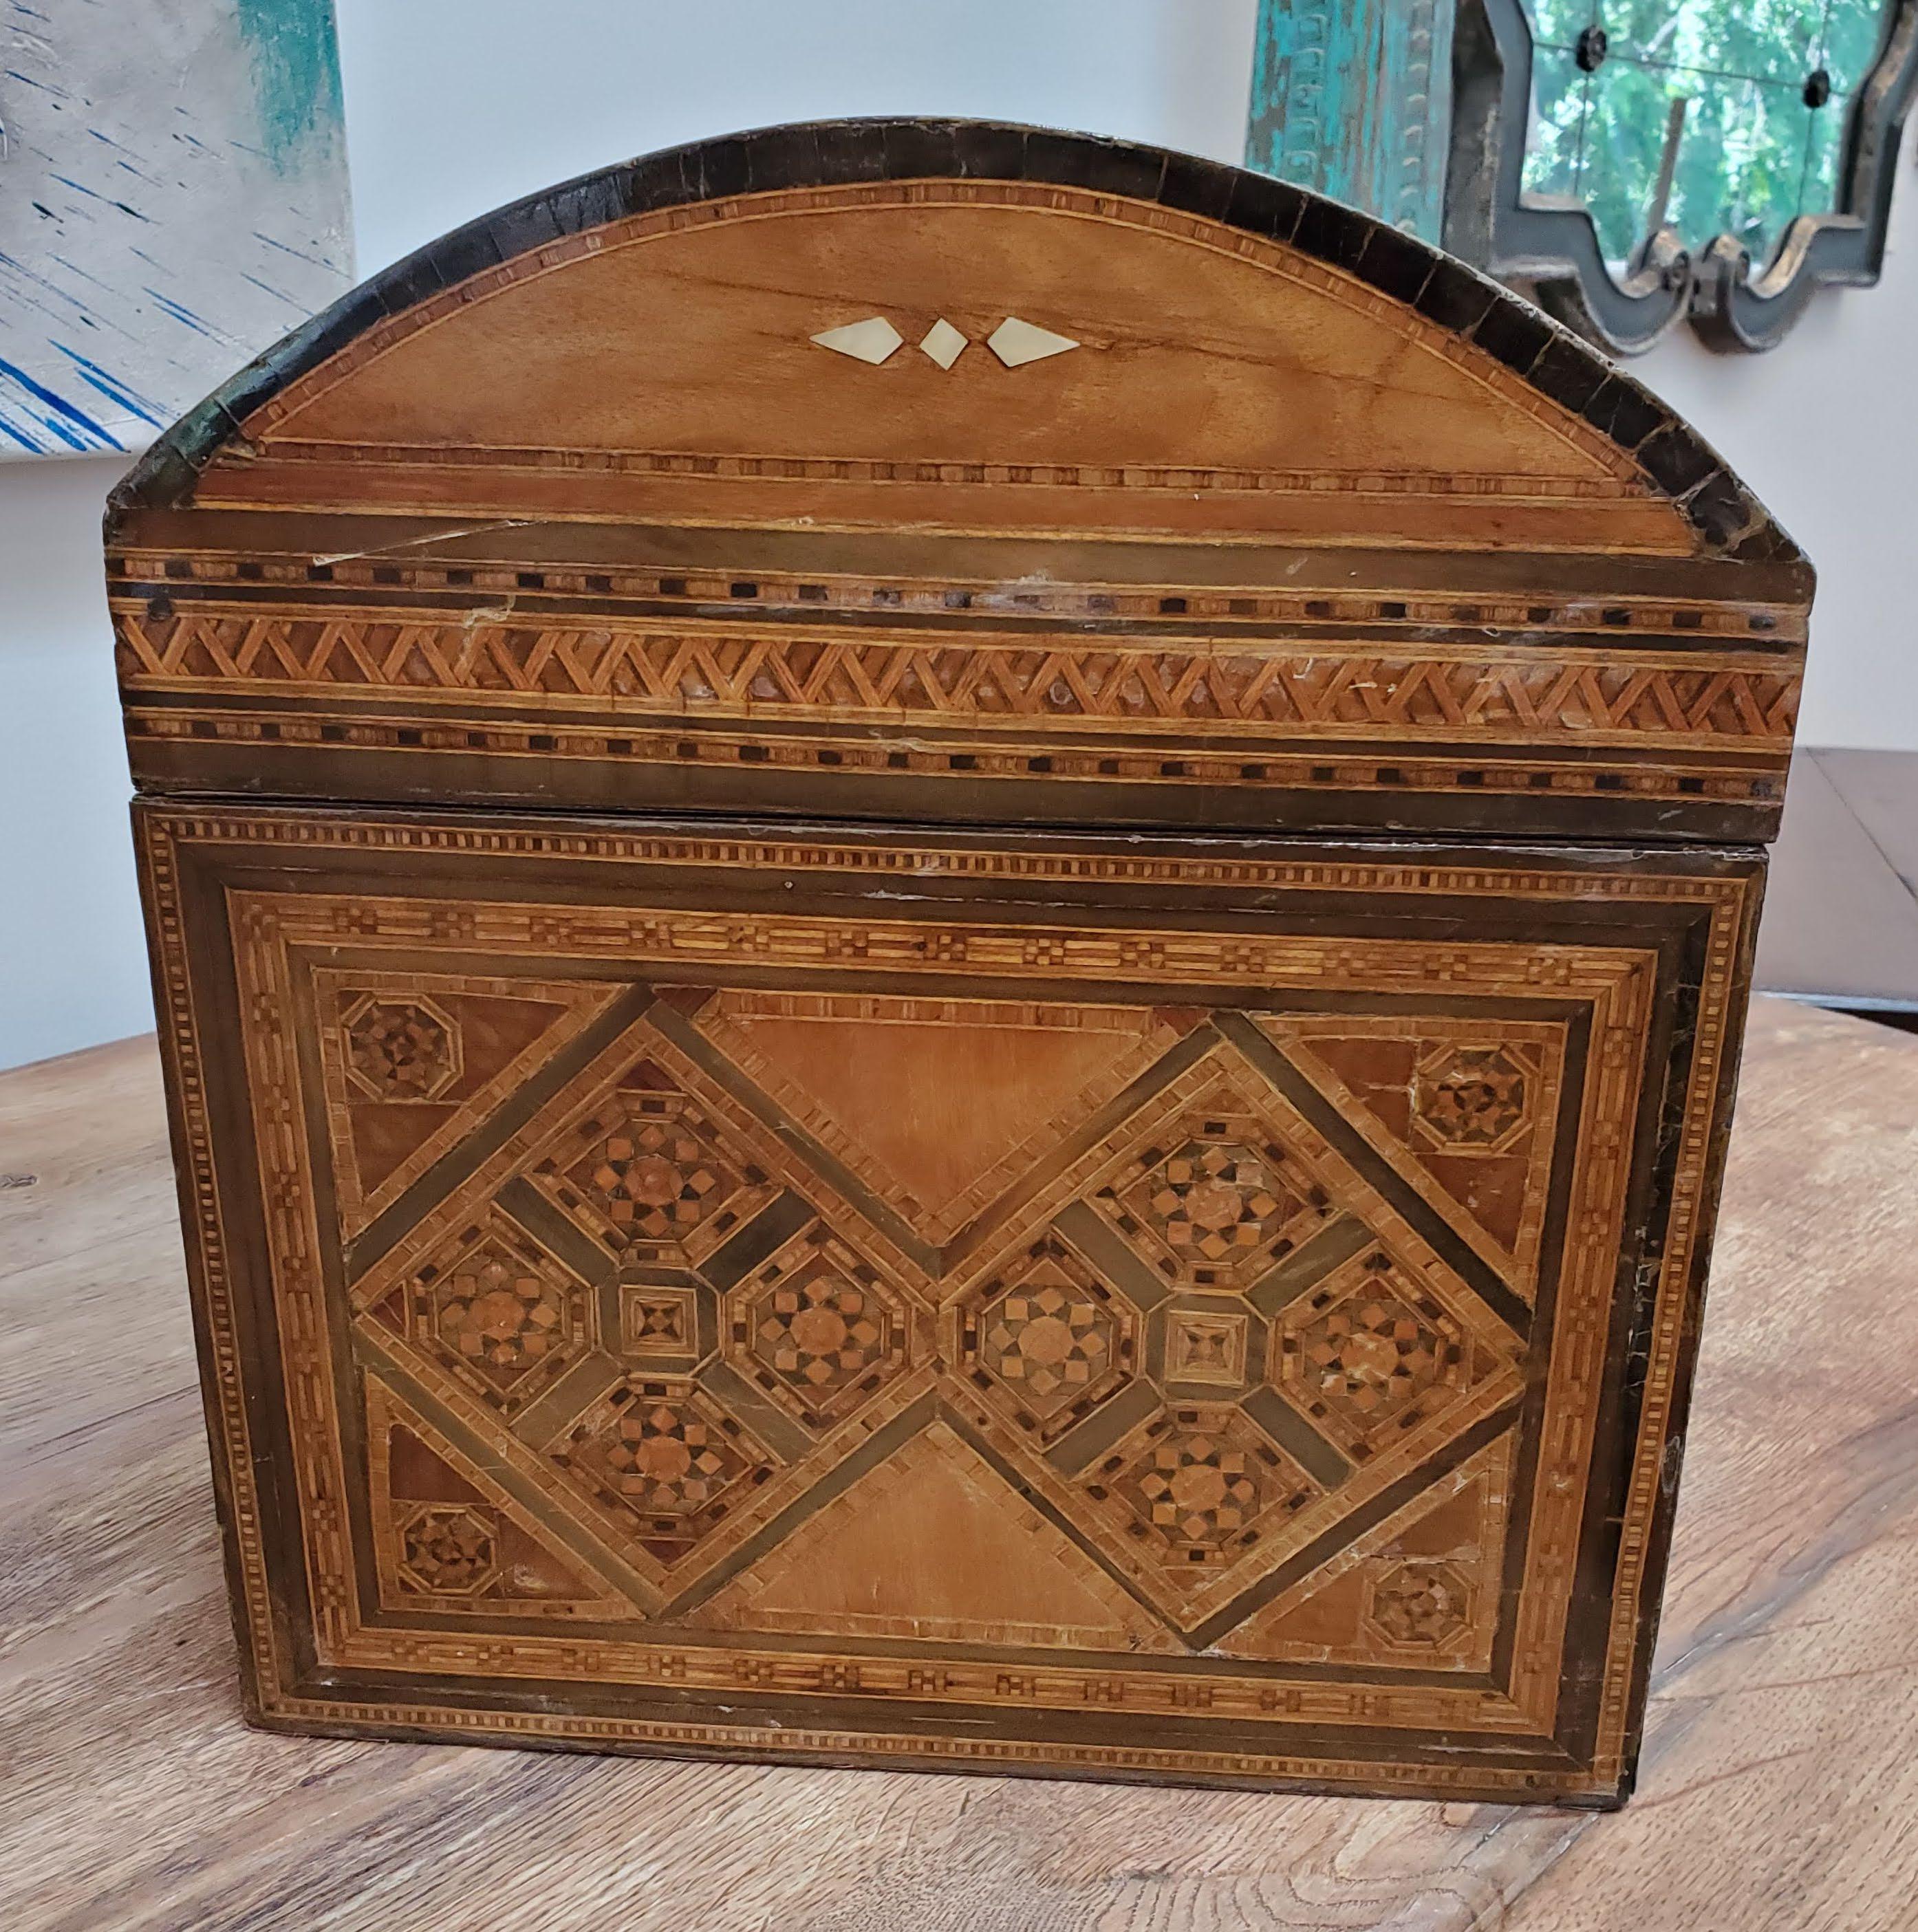 Moorish Large 19th Century Syrian Domed Box Inlaid with Exotic Woods & Mother of Pearl